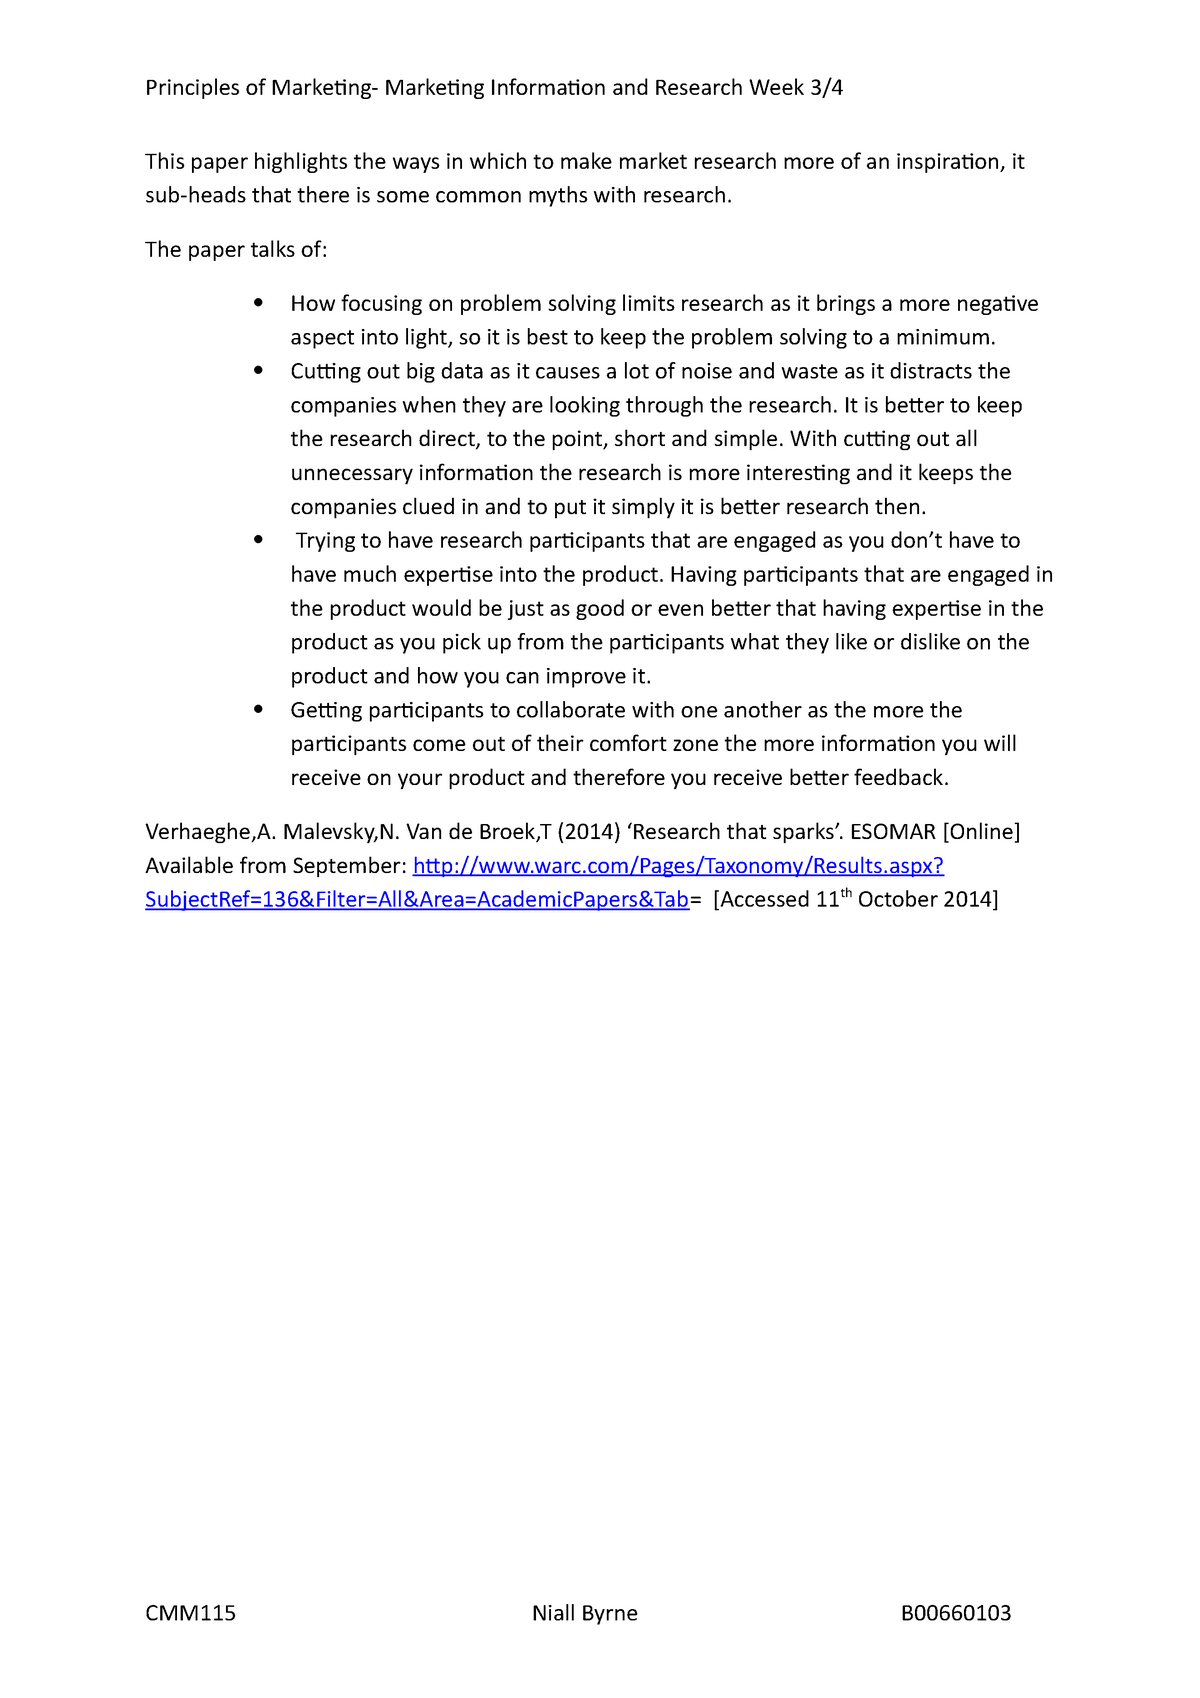 marketing research lecture notes pdf